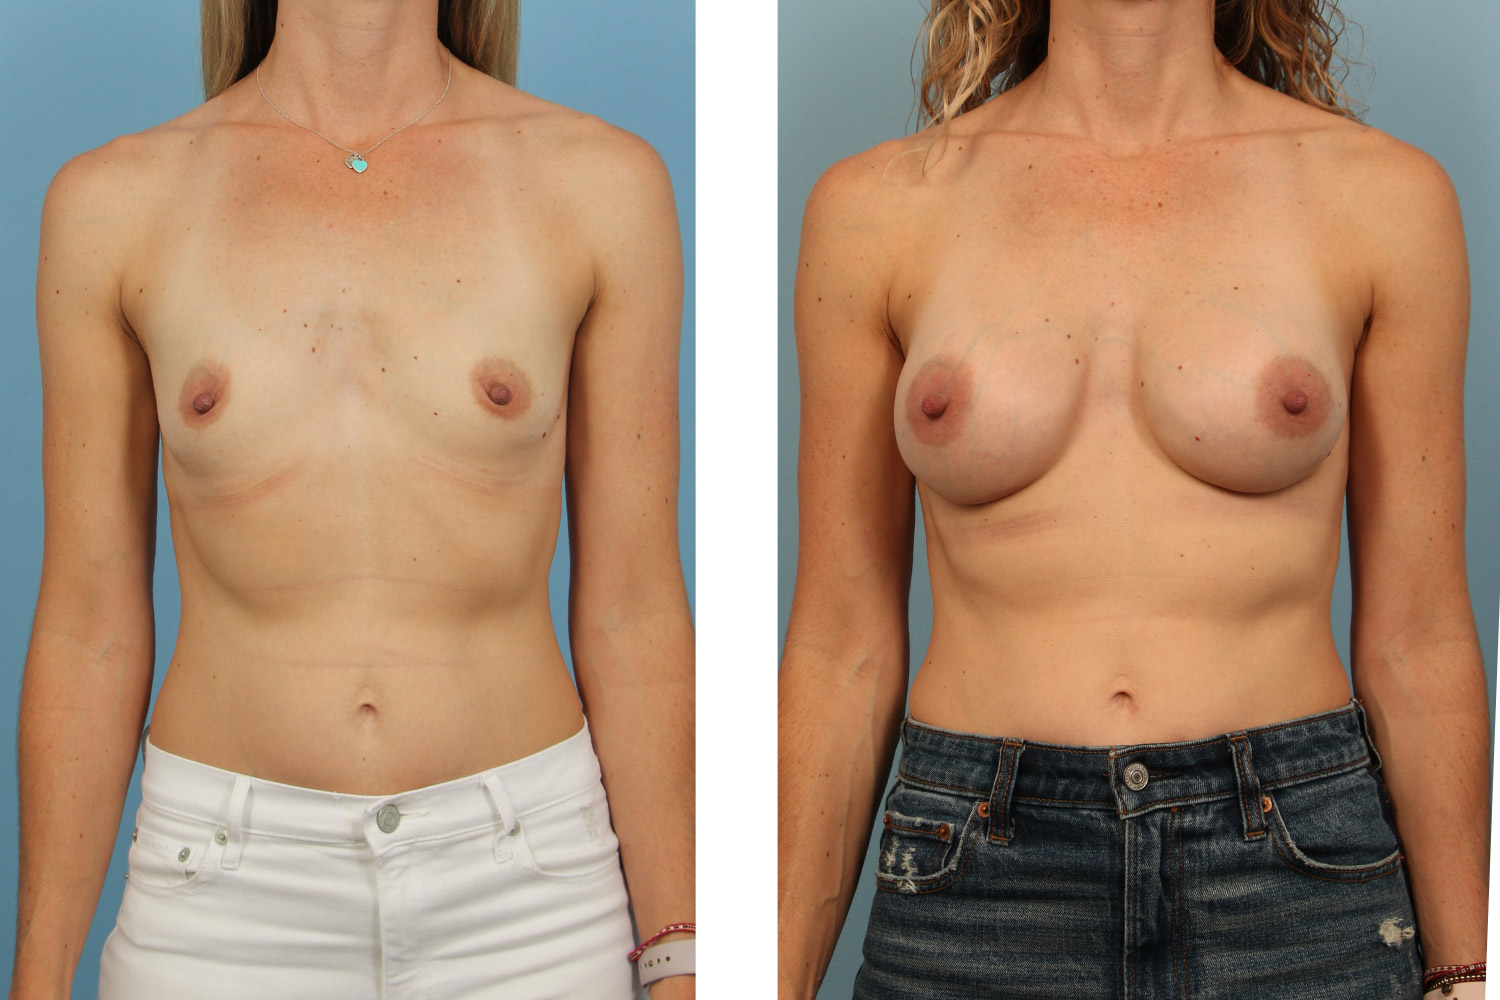 Breast augmentation on a 40-year-old woman